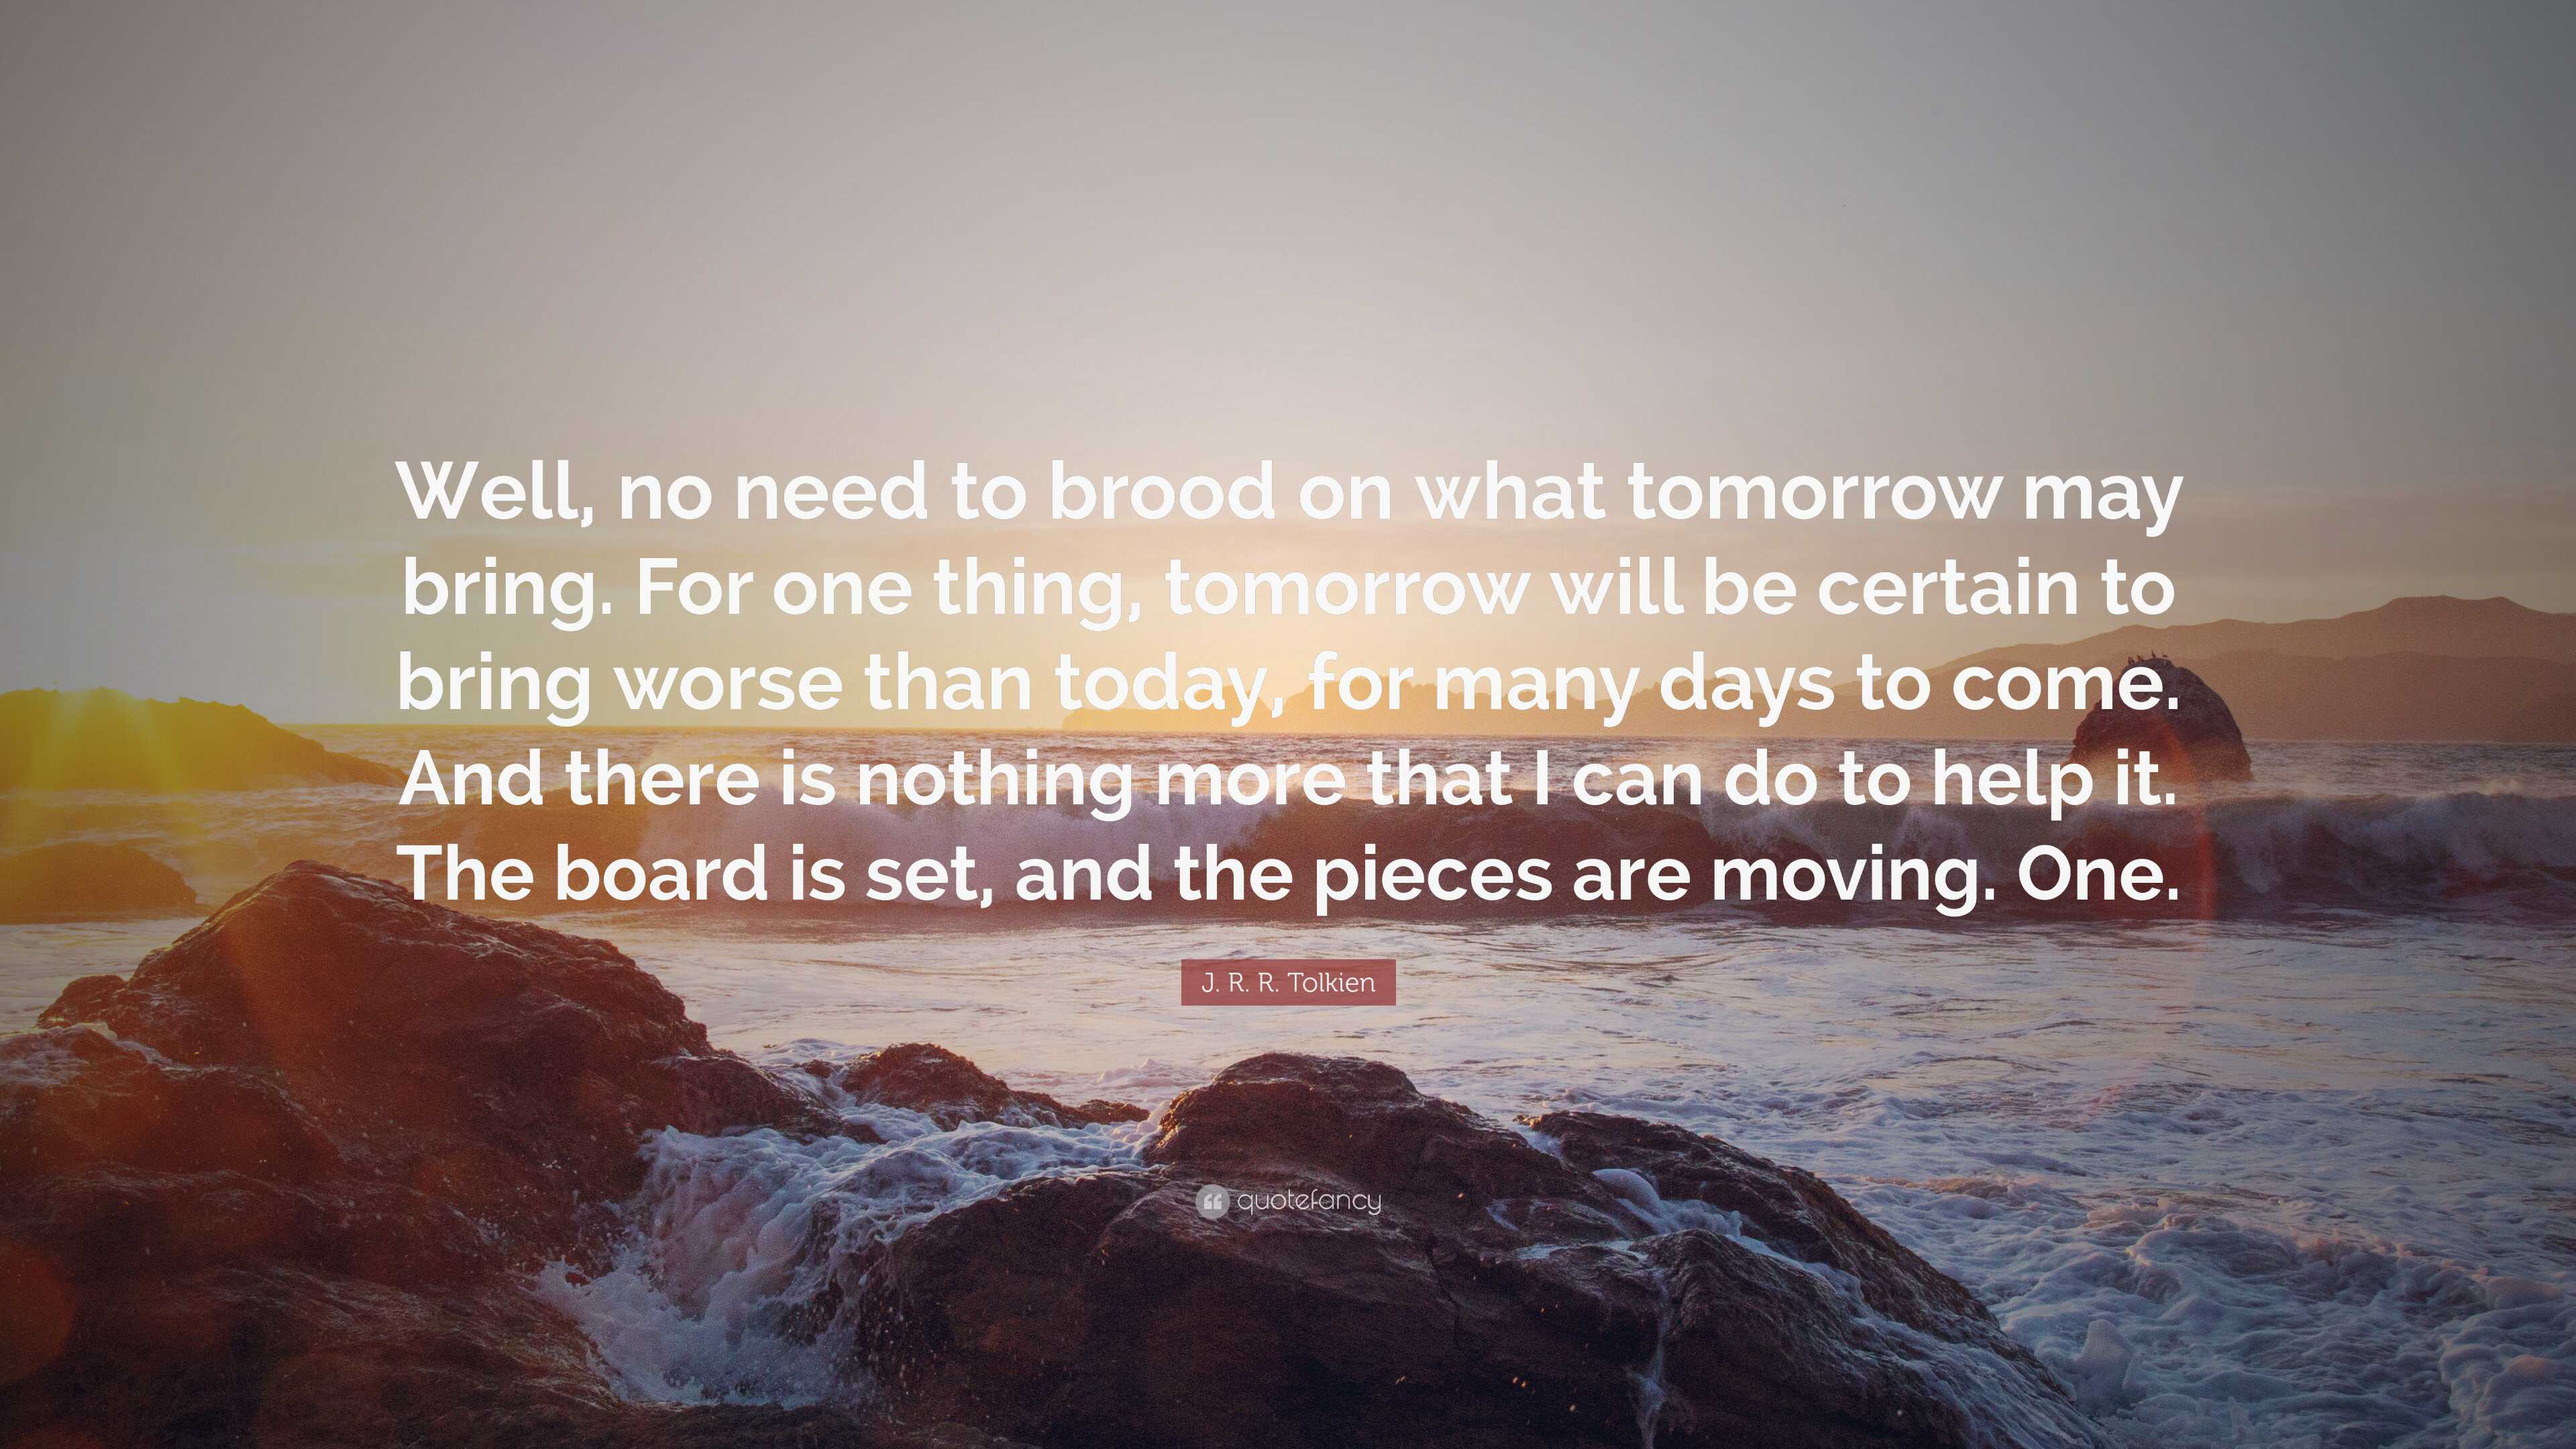 J. R. R. Tolkien Quote: “Well, no need to brood on what tomorrow